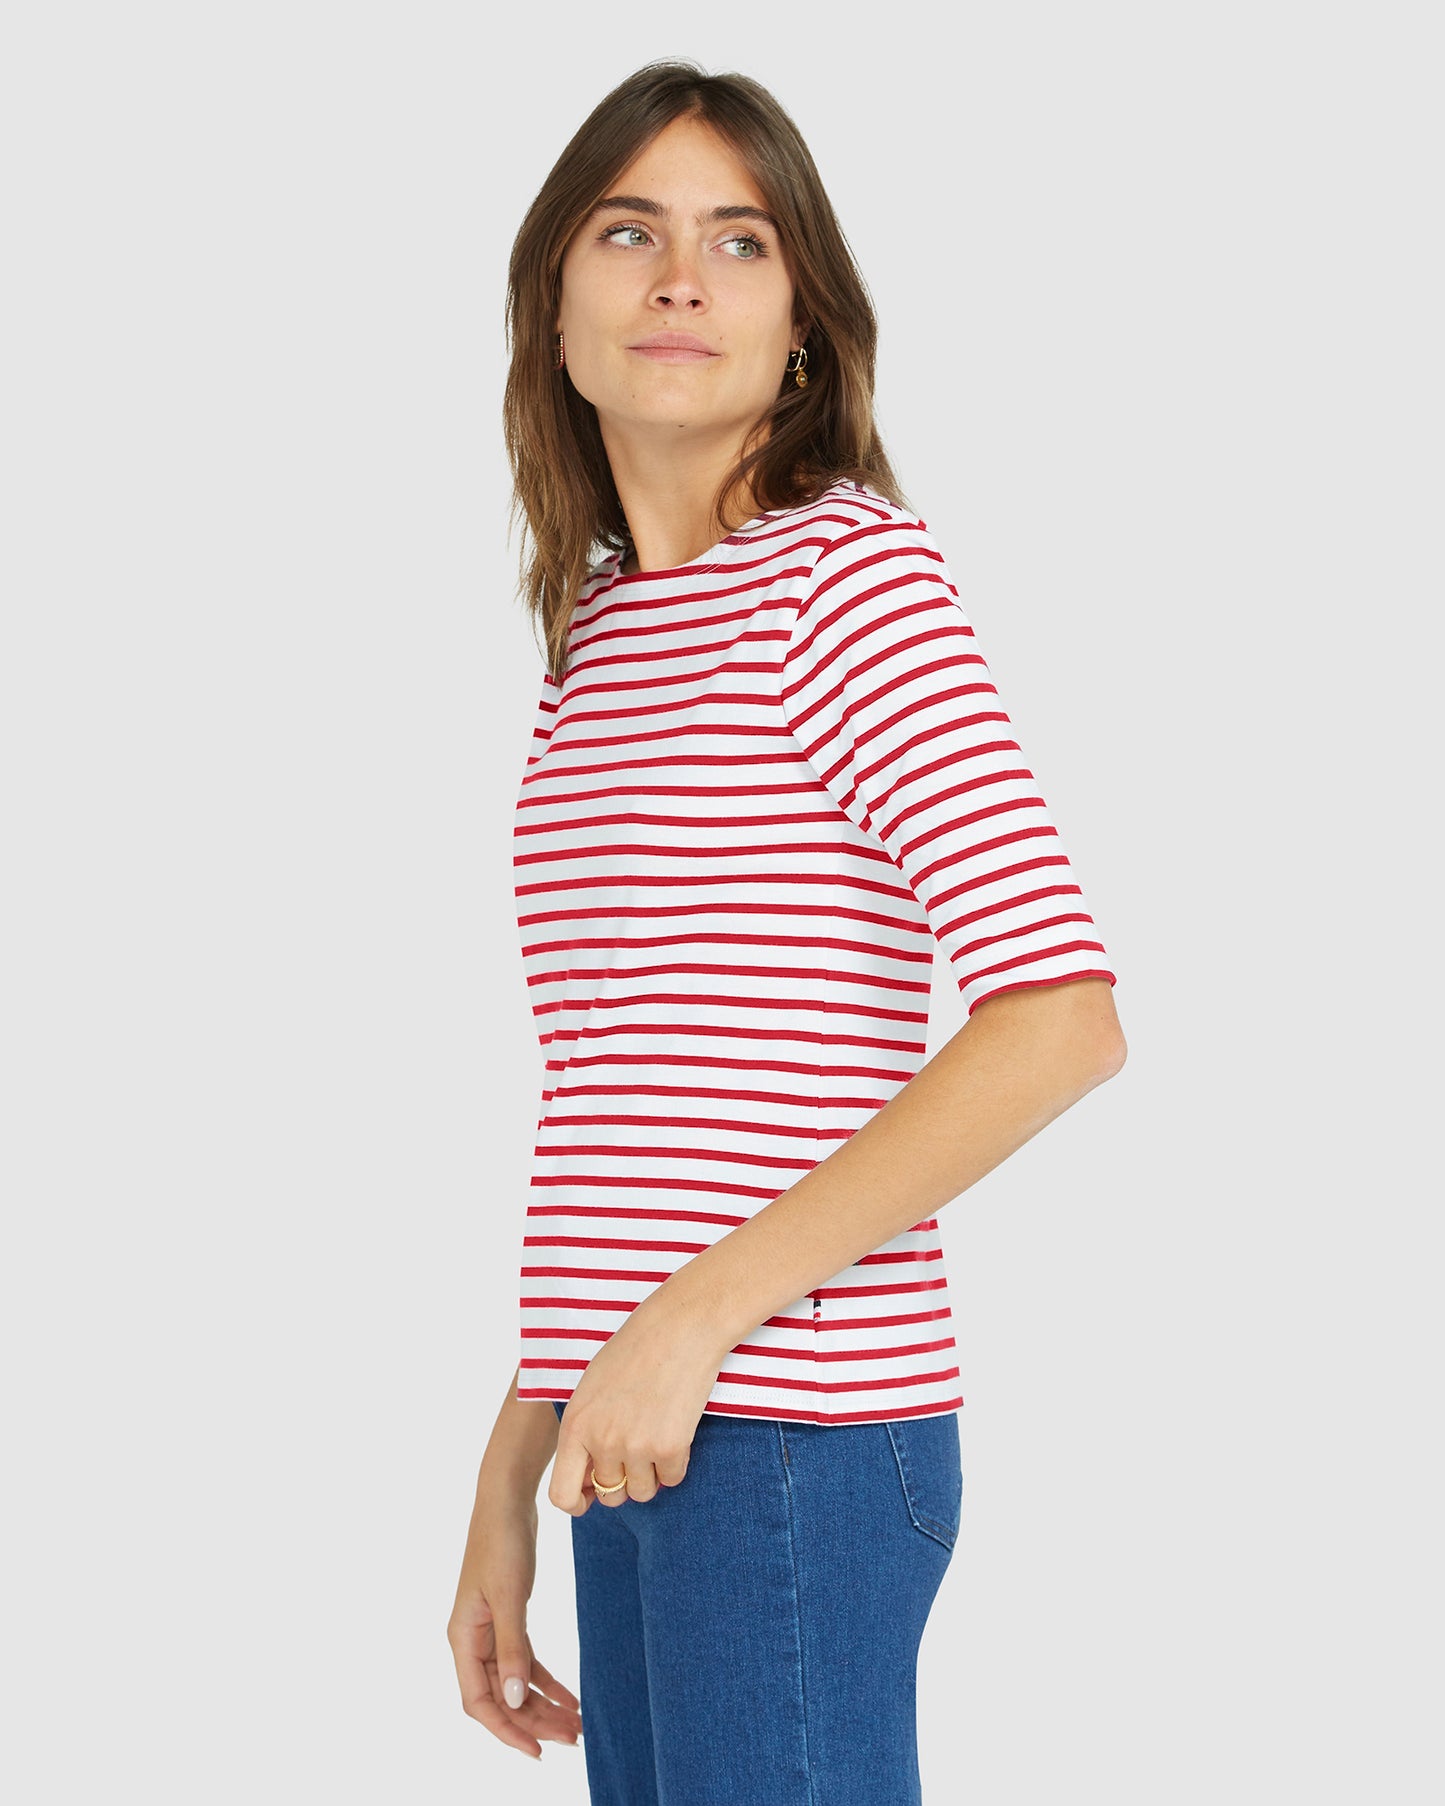 La Bouvier Red Stripe French Tee - Boat Neck PREORDER FOR END APRIL